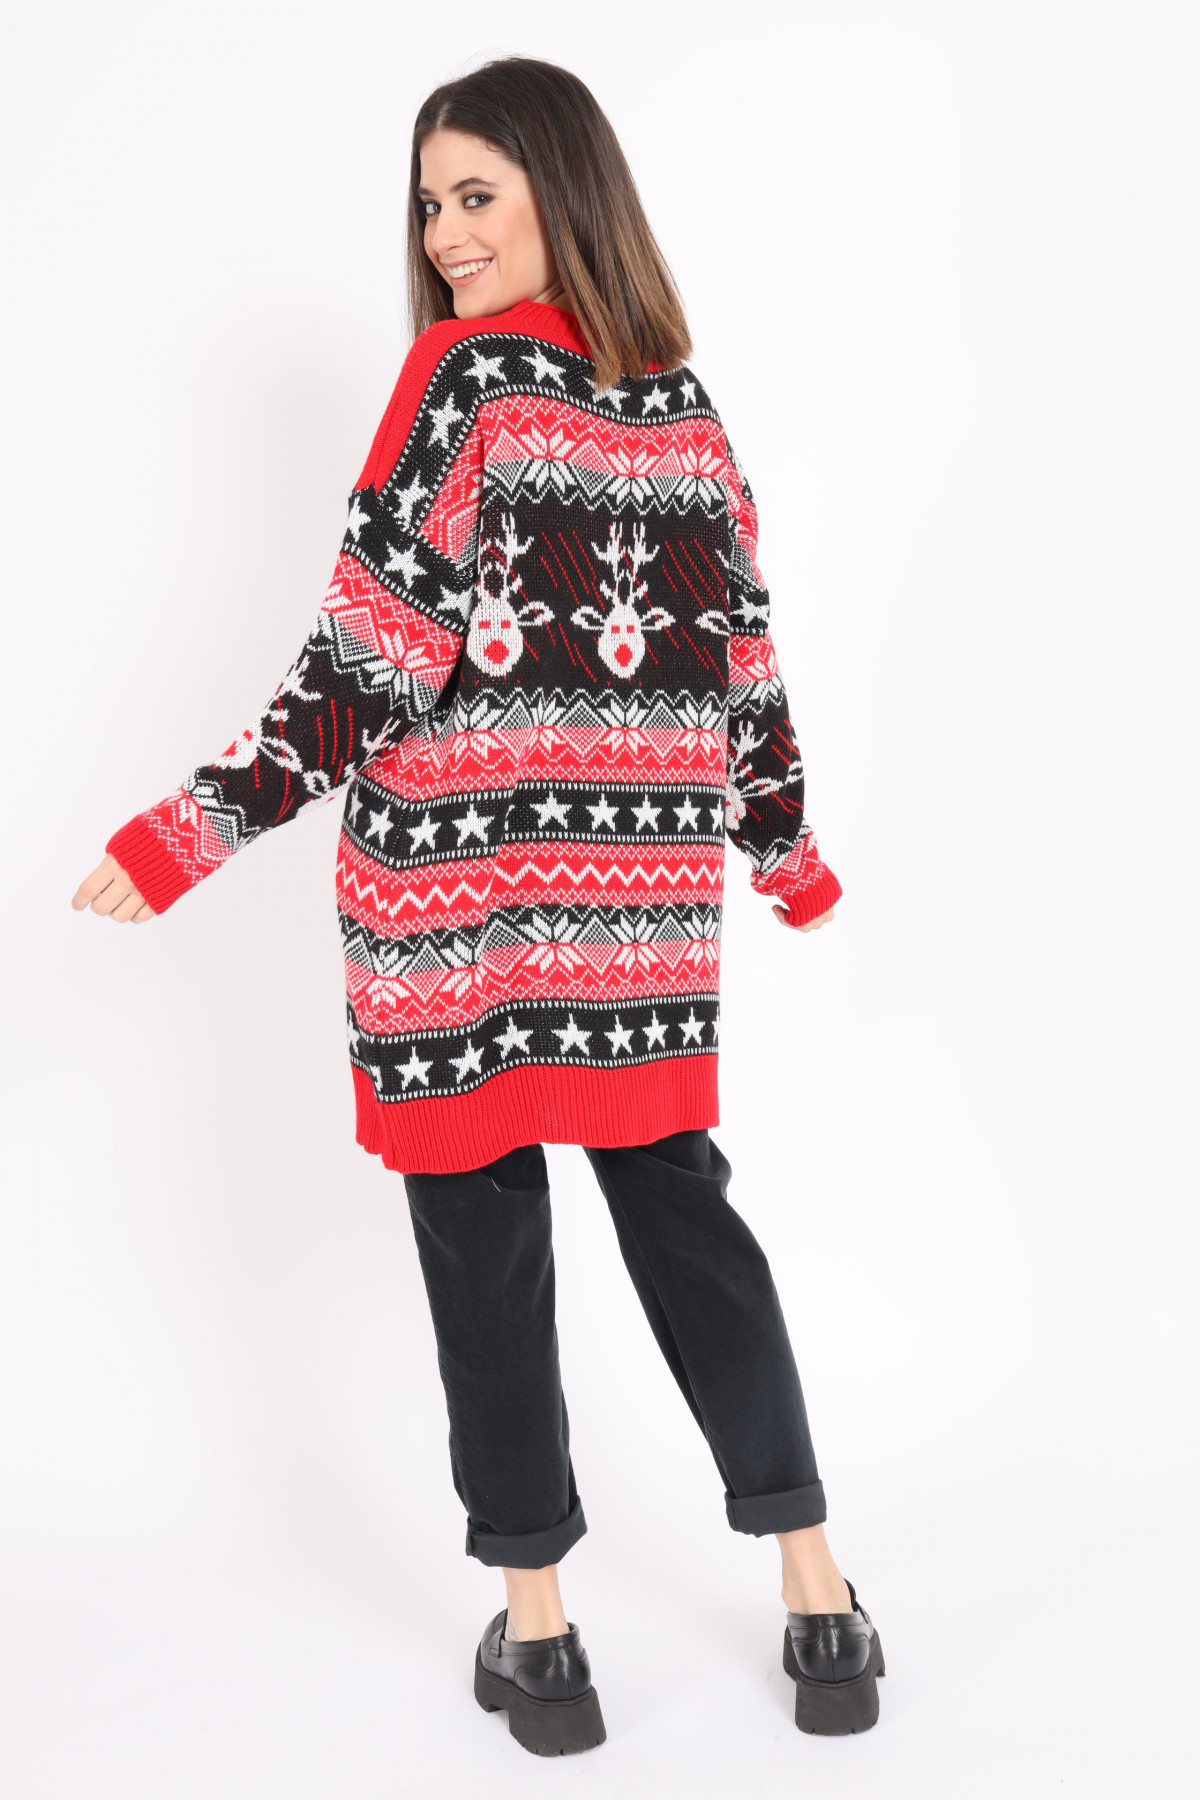 Maxi sweater in Christmas pattern